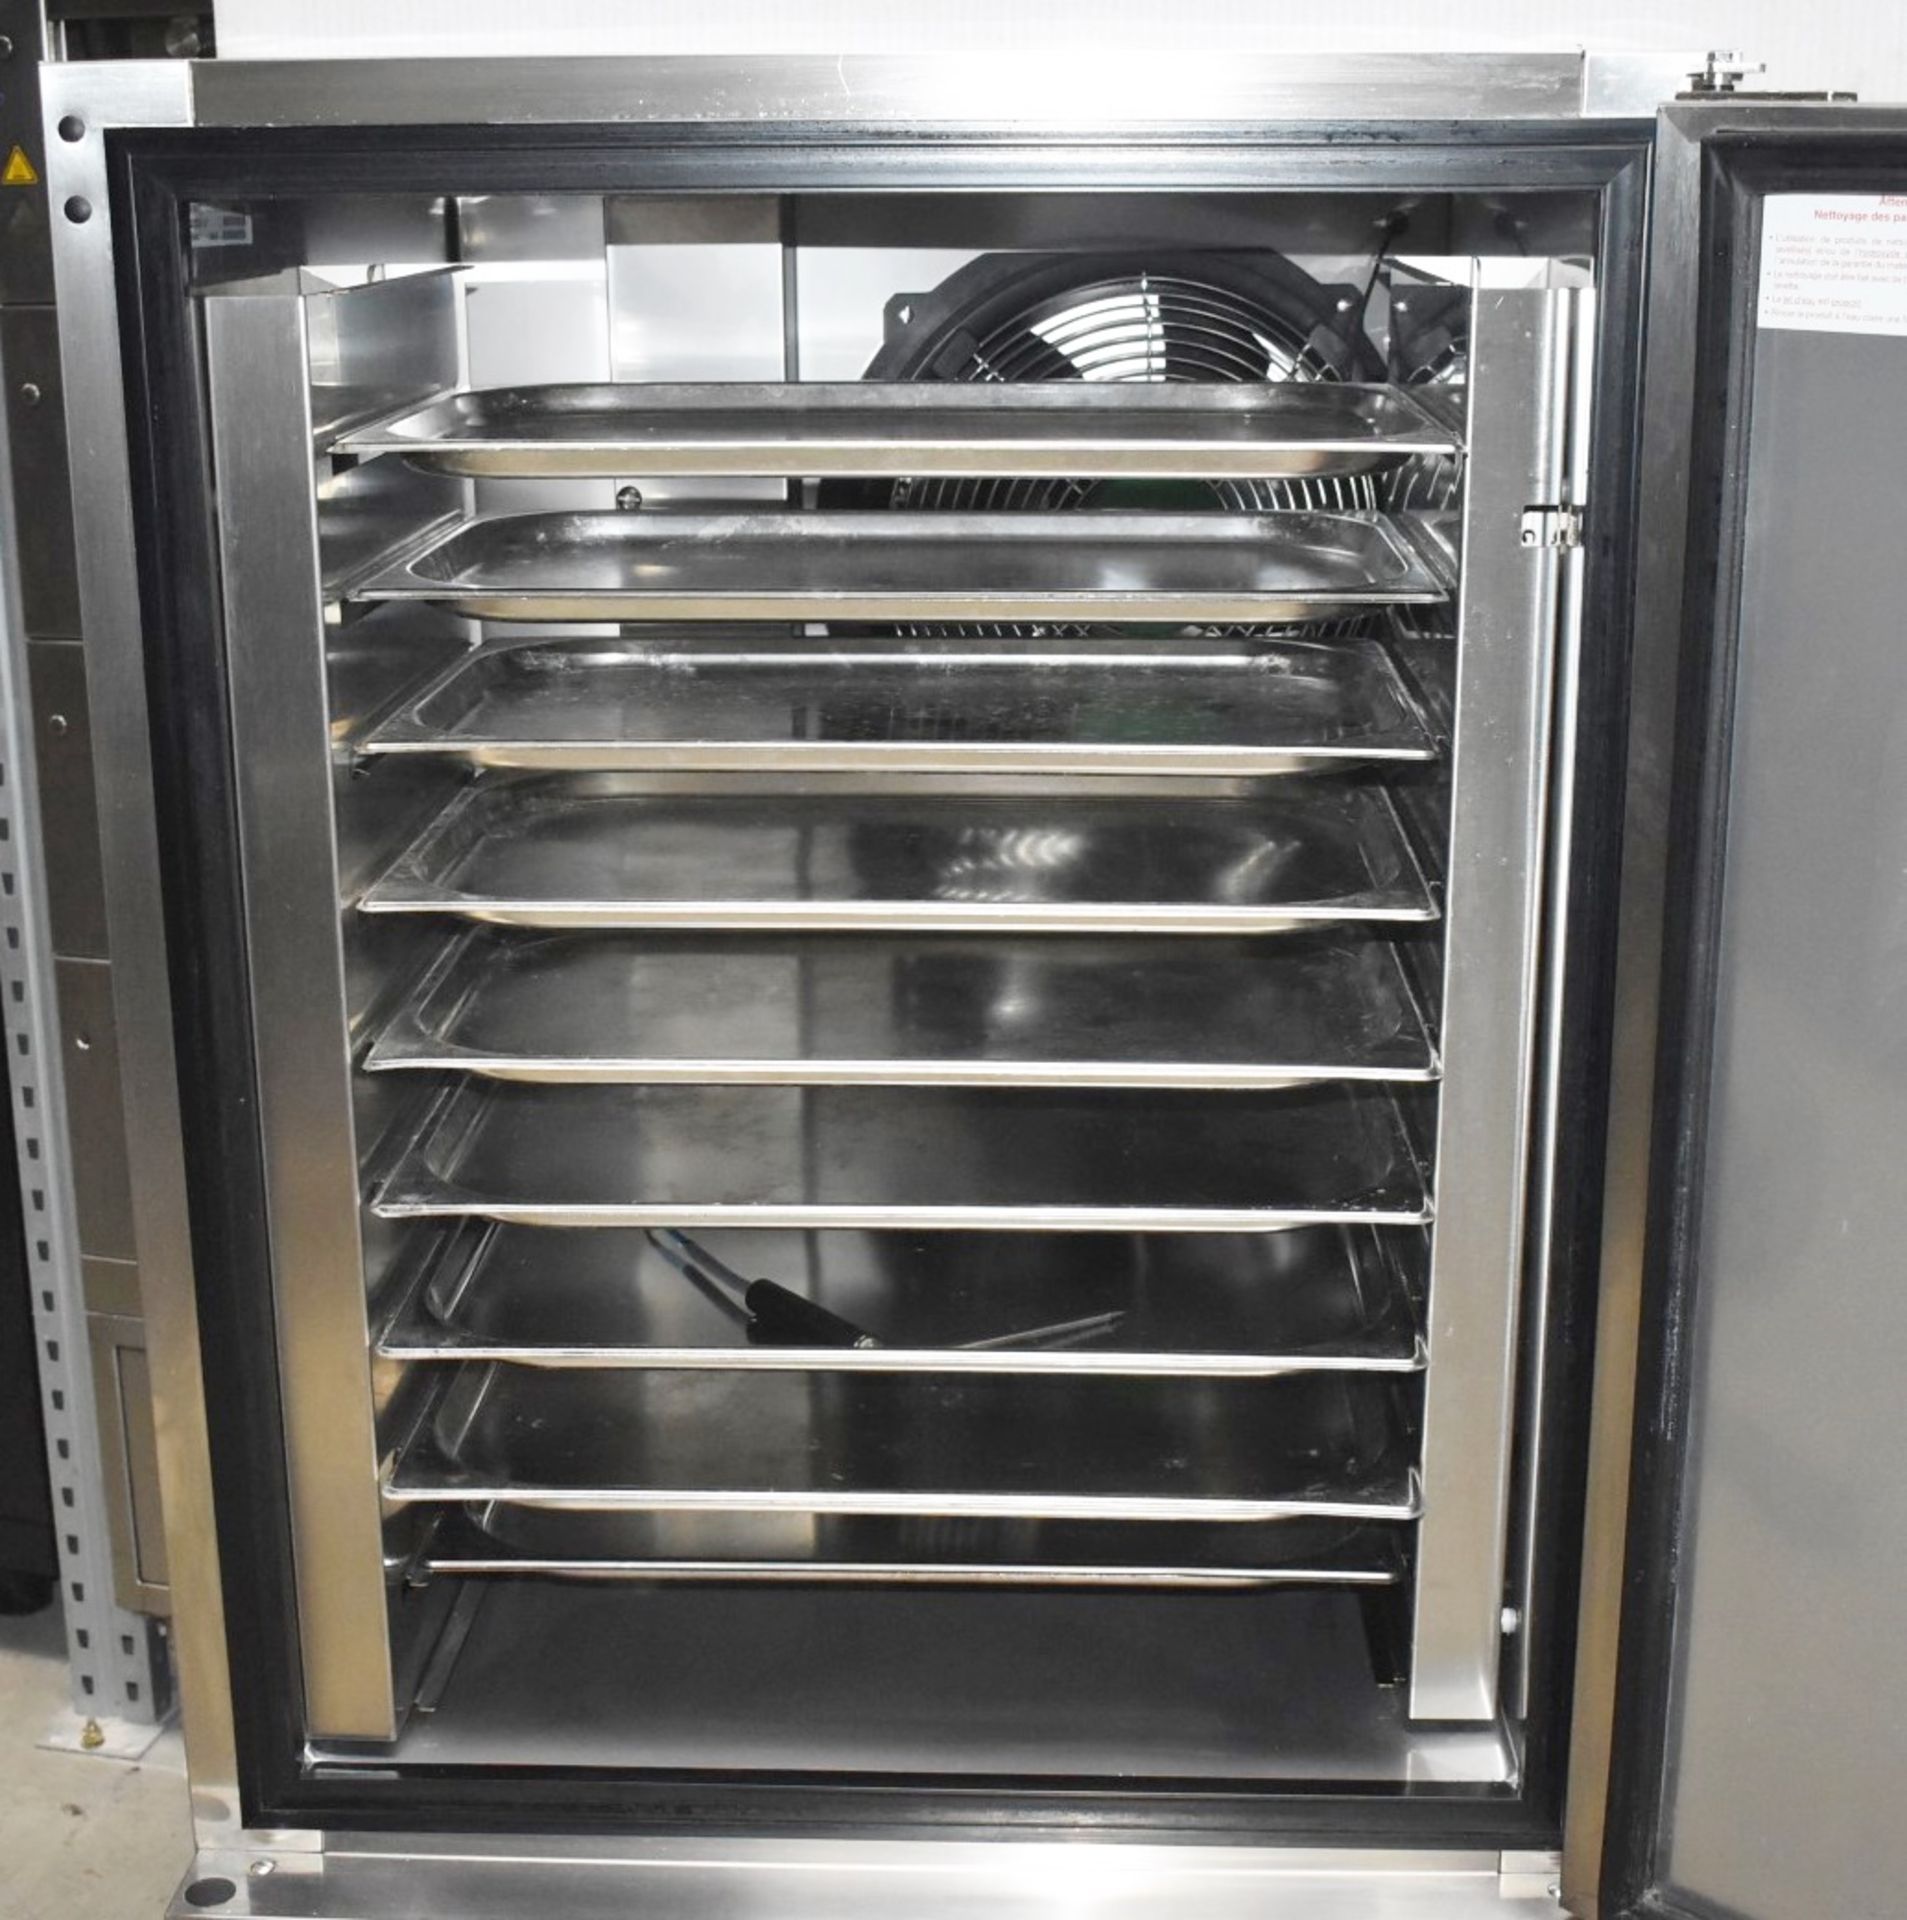 1 x Foster BFT38 Blast Freezer - 2019 Model - Includes Full Set of Internal Trays - RRP £8,322 - - Image 9 of 18